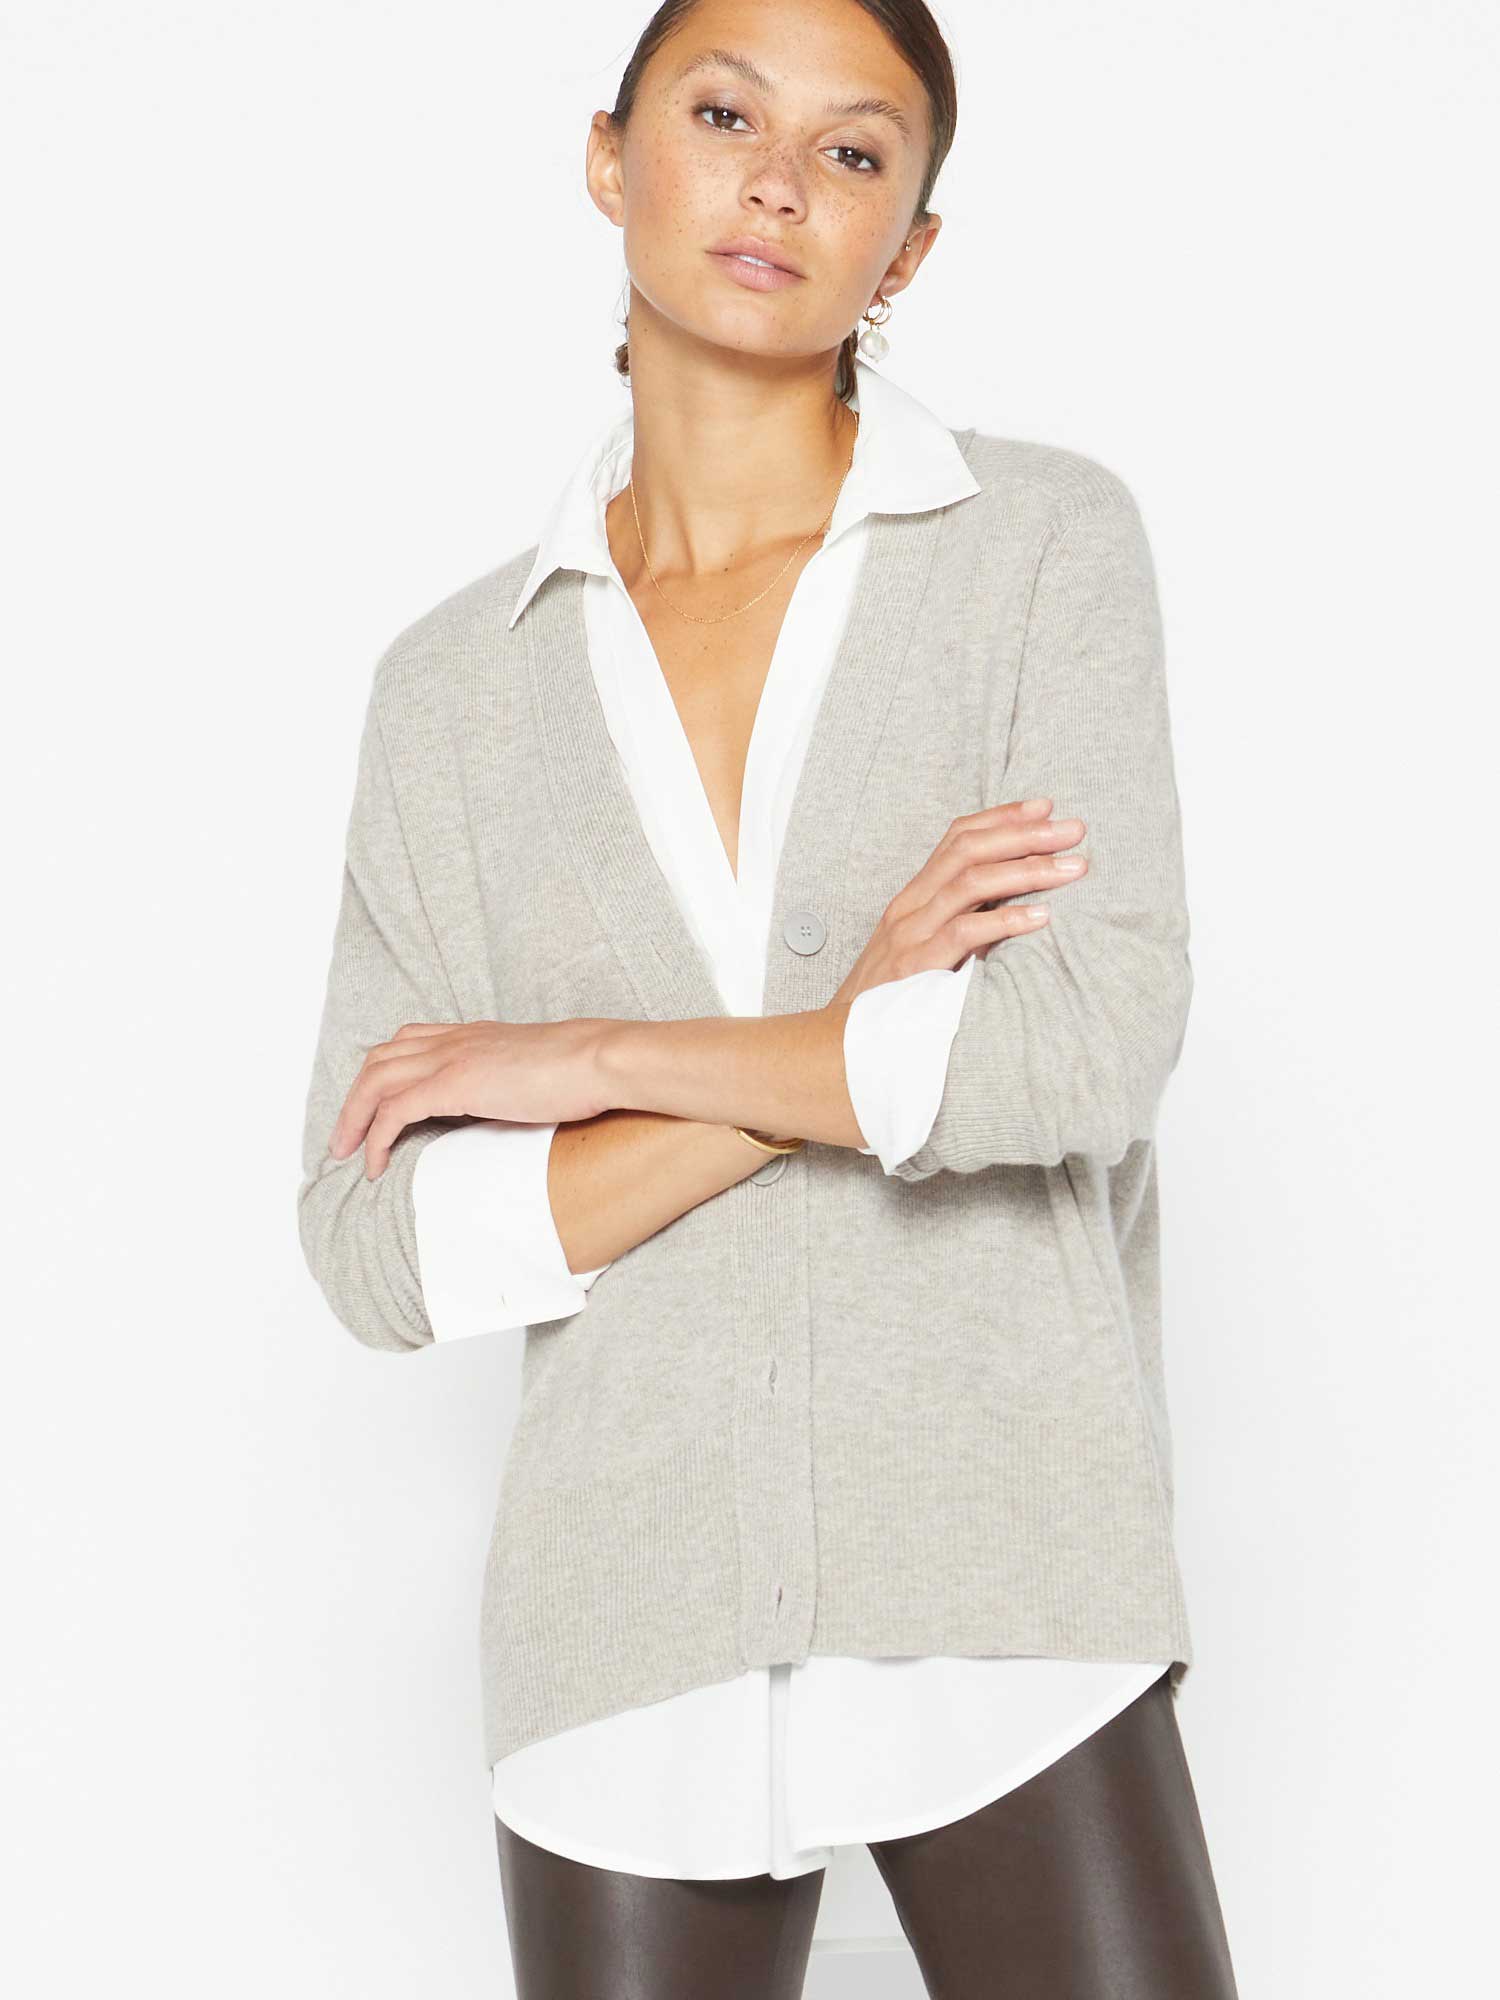 update 202402201526 THE CALLIE LAYERED LOOKER CARDIGAN